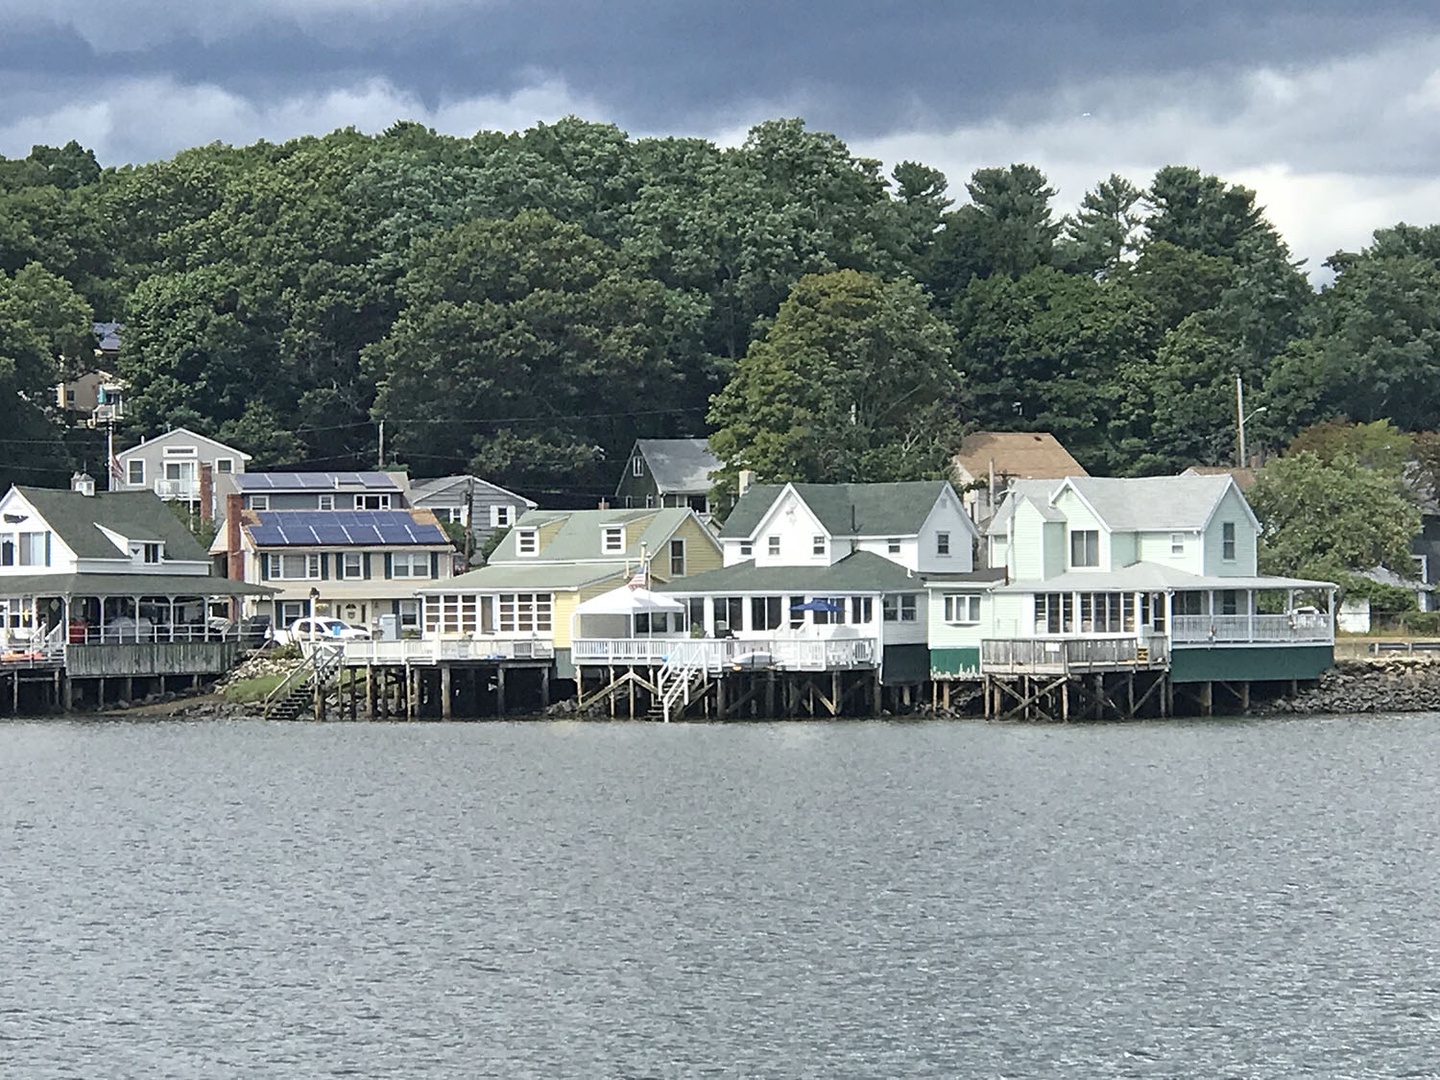 View of the Ryal Side neighborhood from the Danvers River.